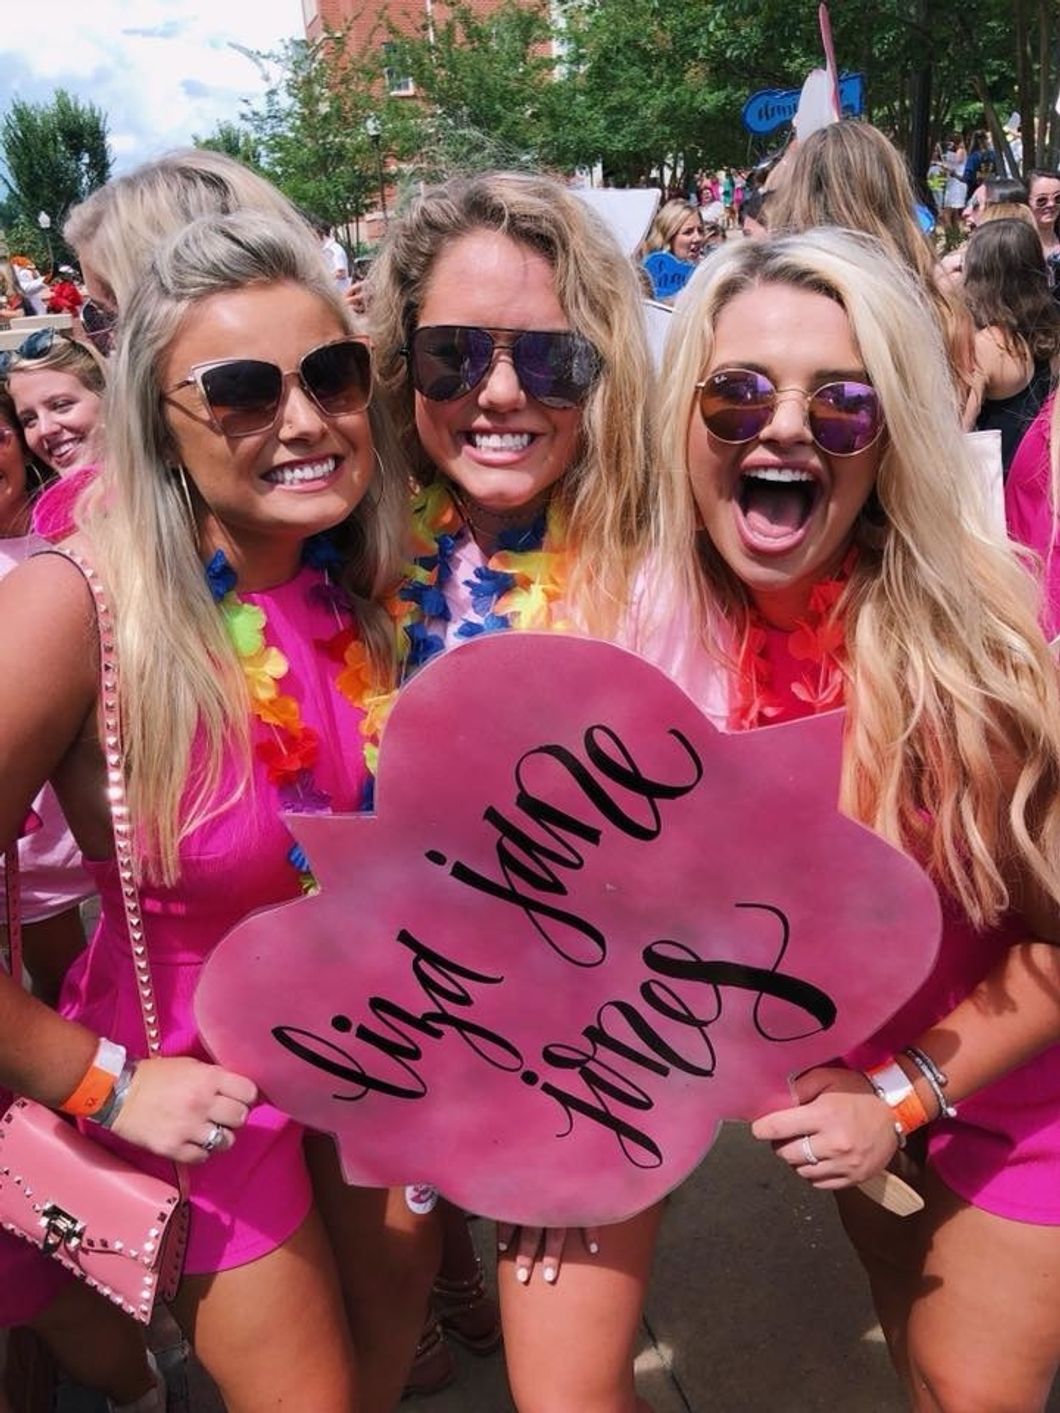 10 Items Every Girl Going Through Sorority Rush Needs In Her Purse To Survive The Week